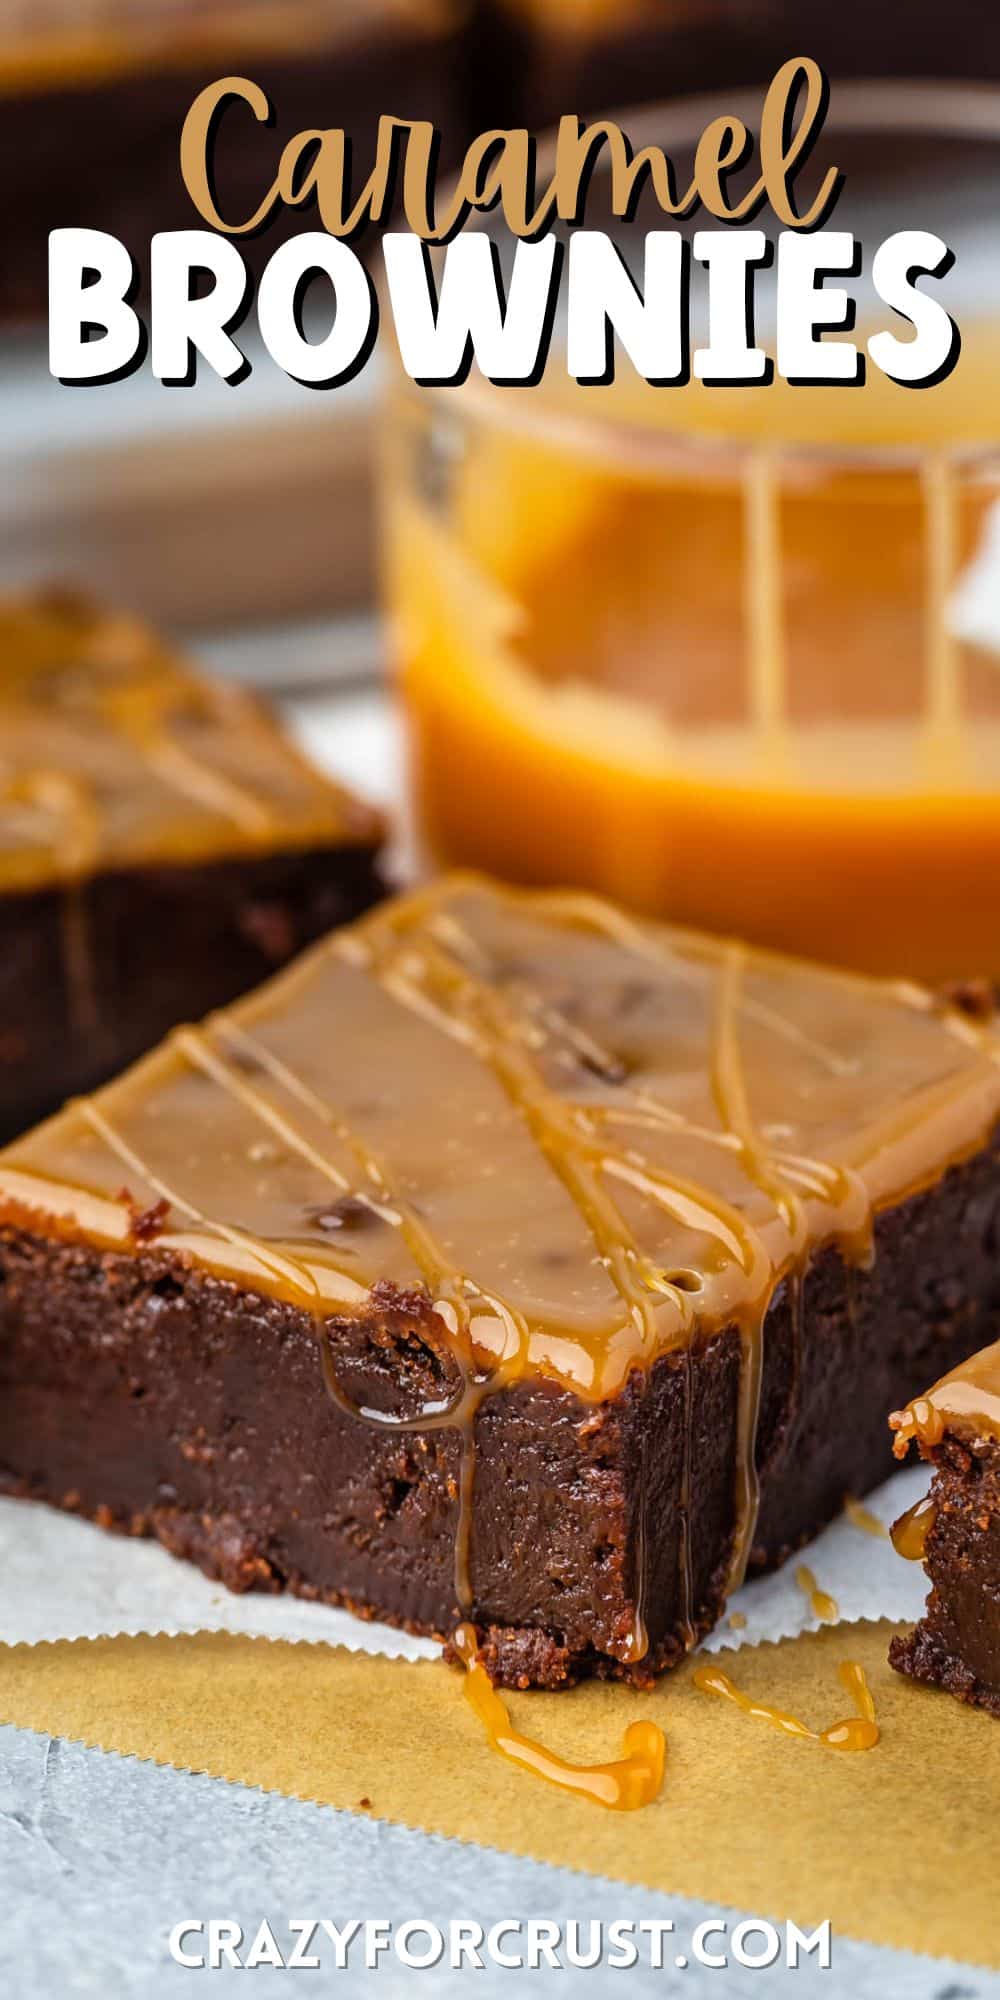 a brownie with caramel baked and dripped on top with words on the image